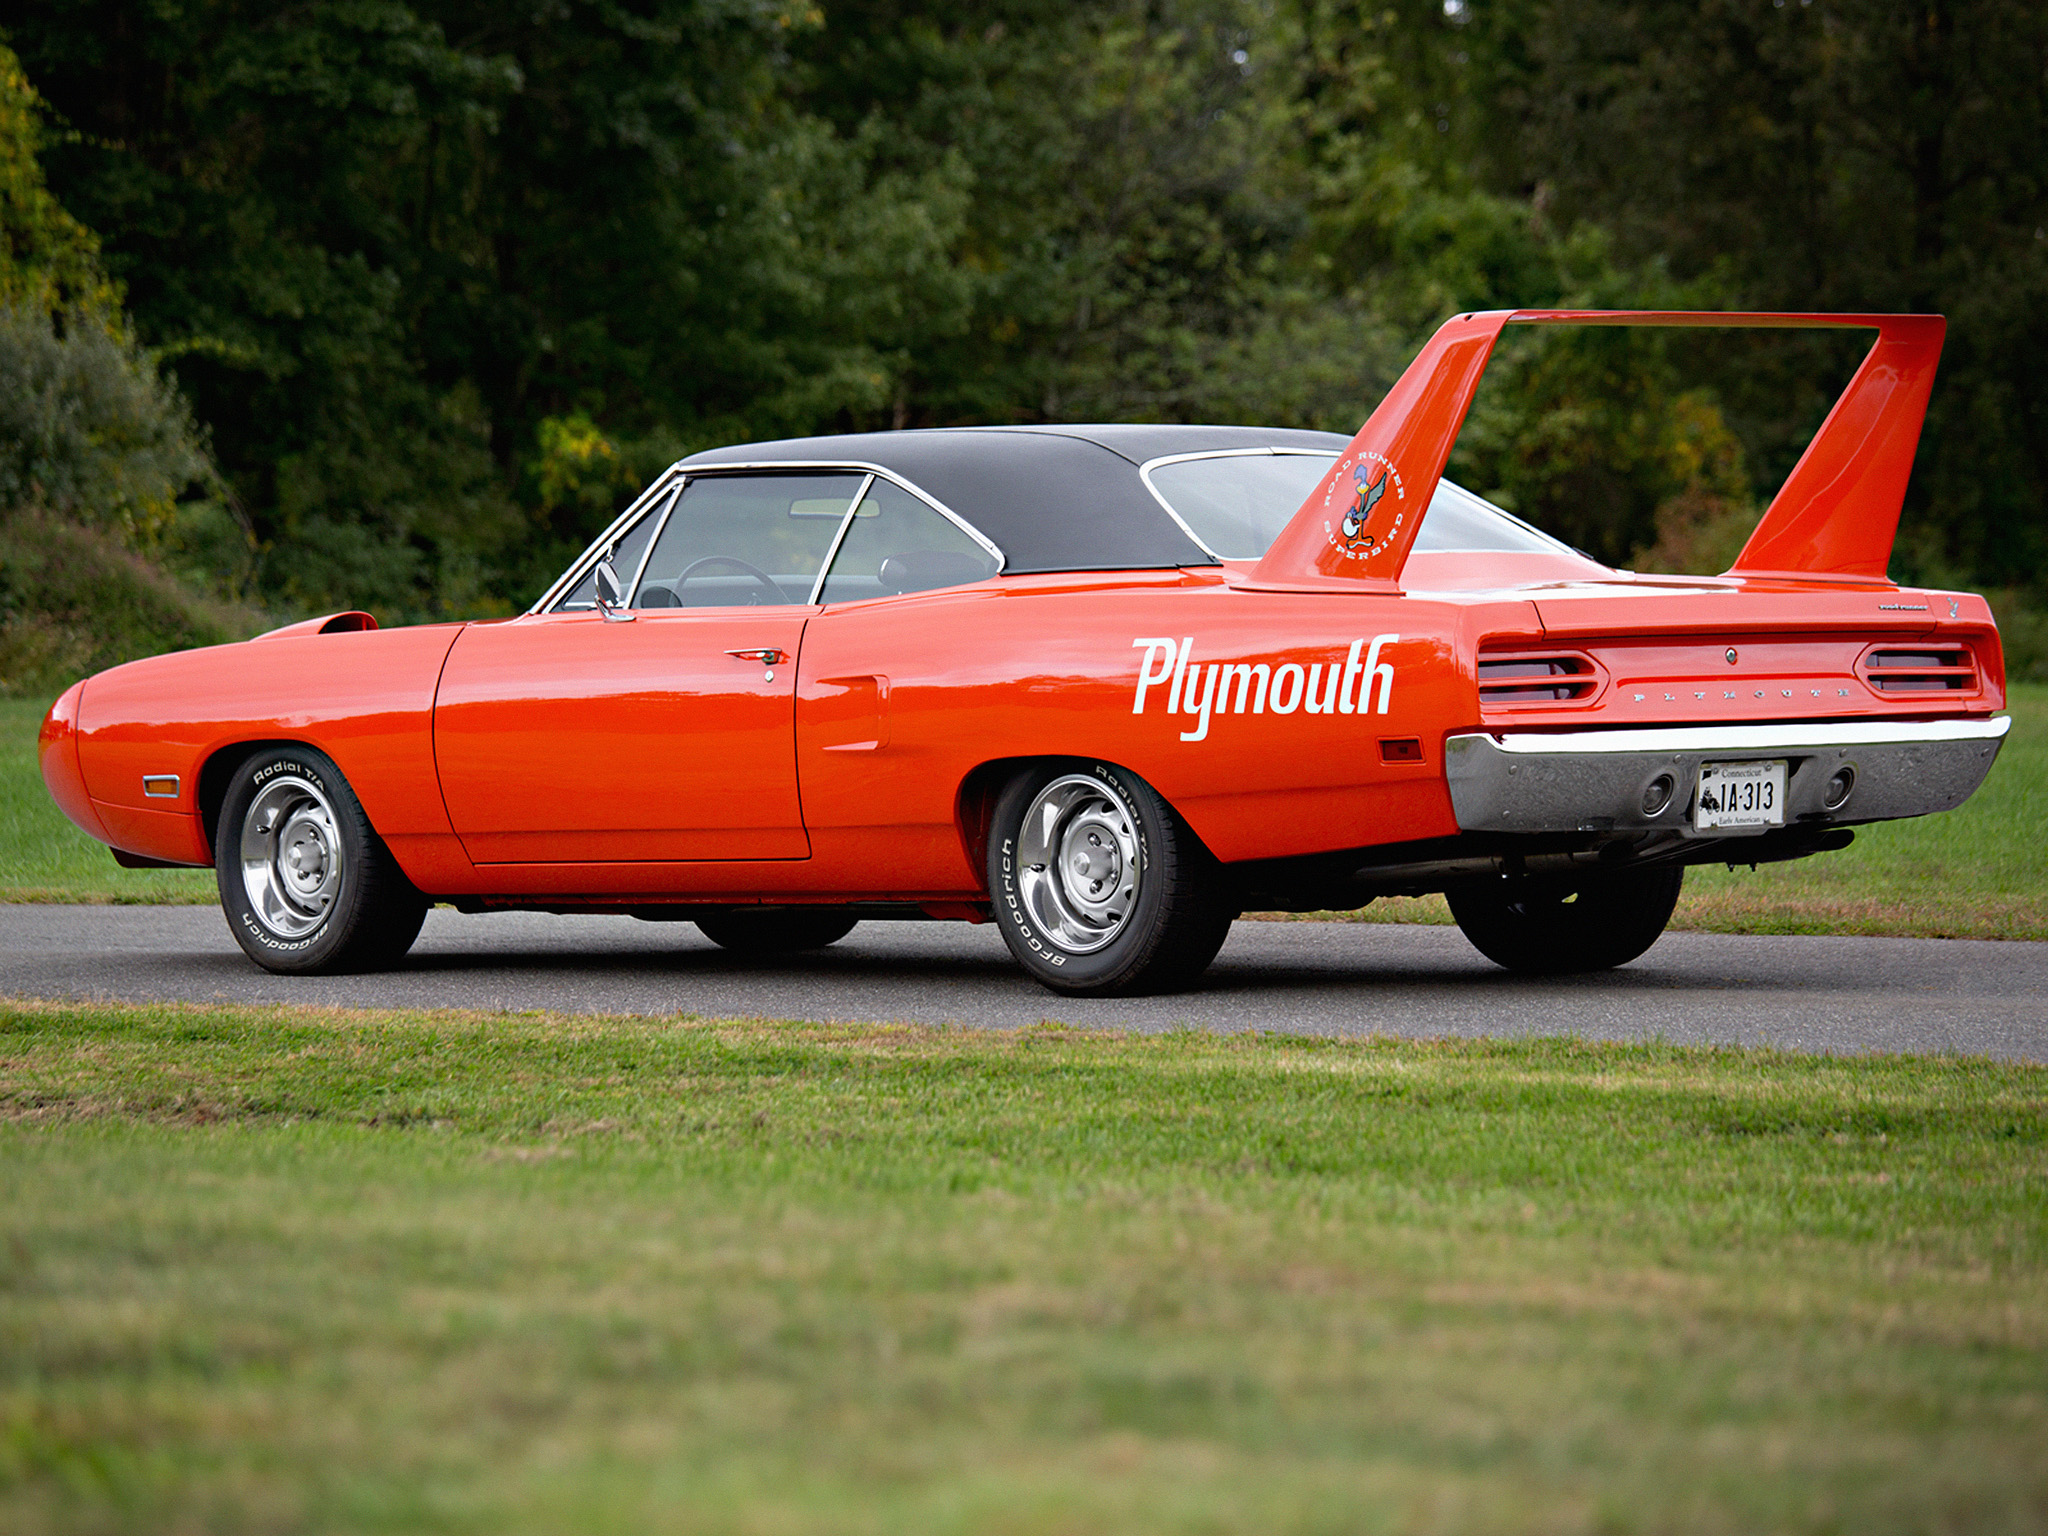 General 2048x1536 car classic car muscle cars Plymouth rear wing Plymouth Superbird American cars